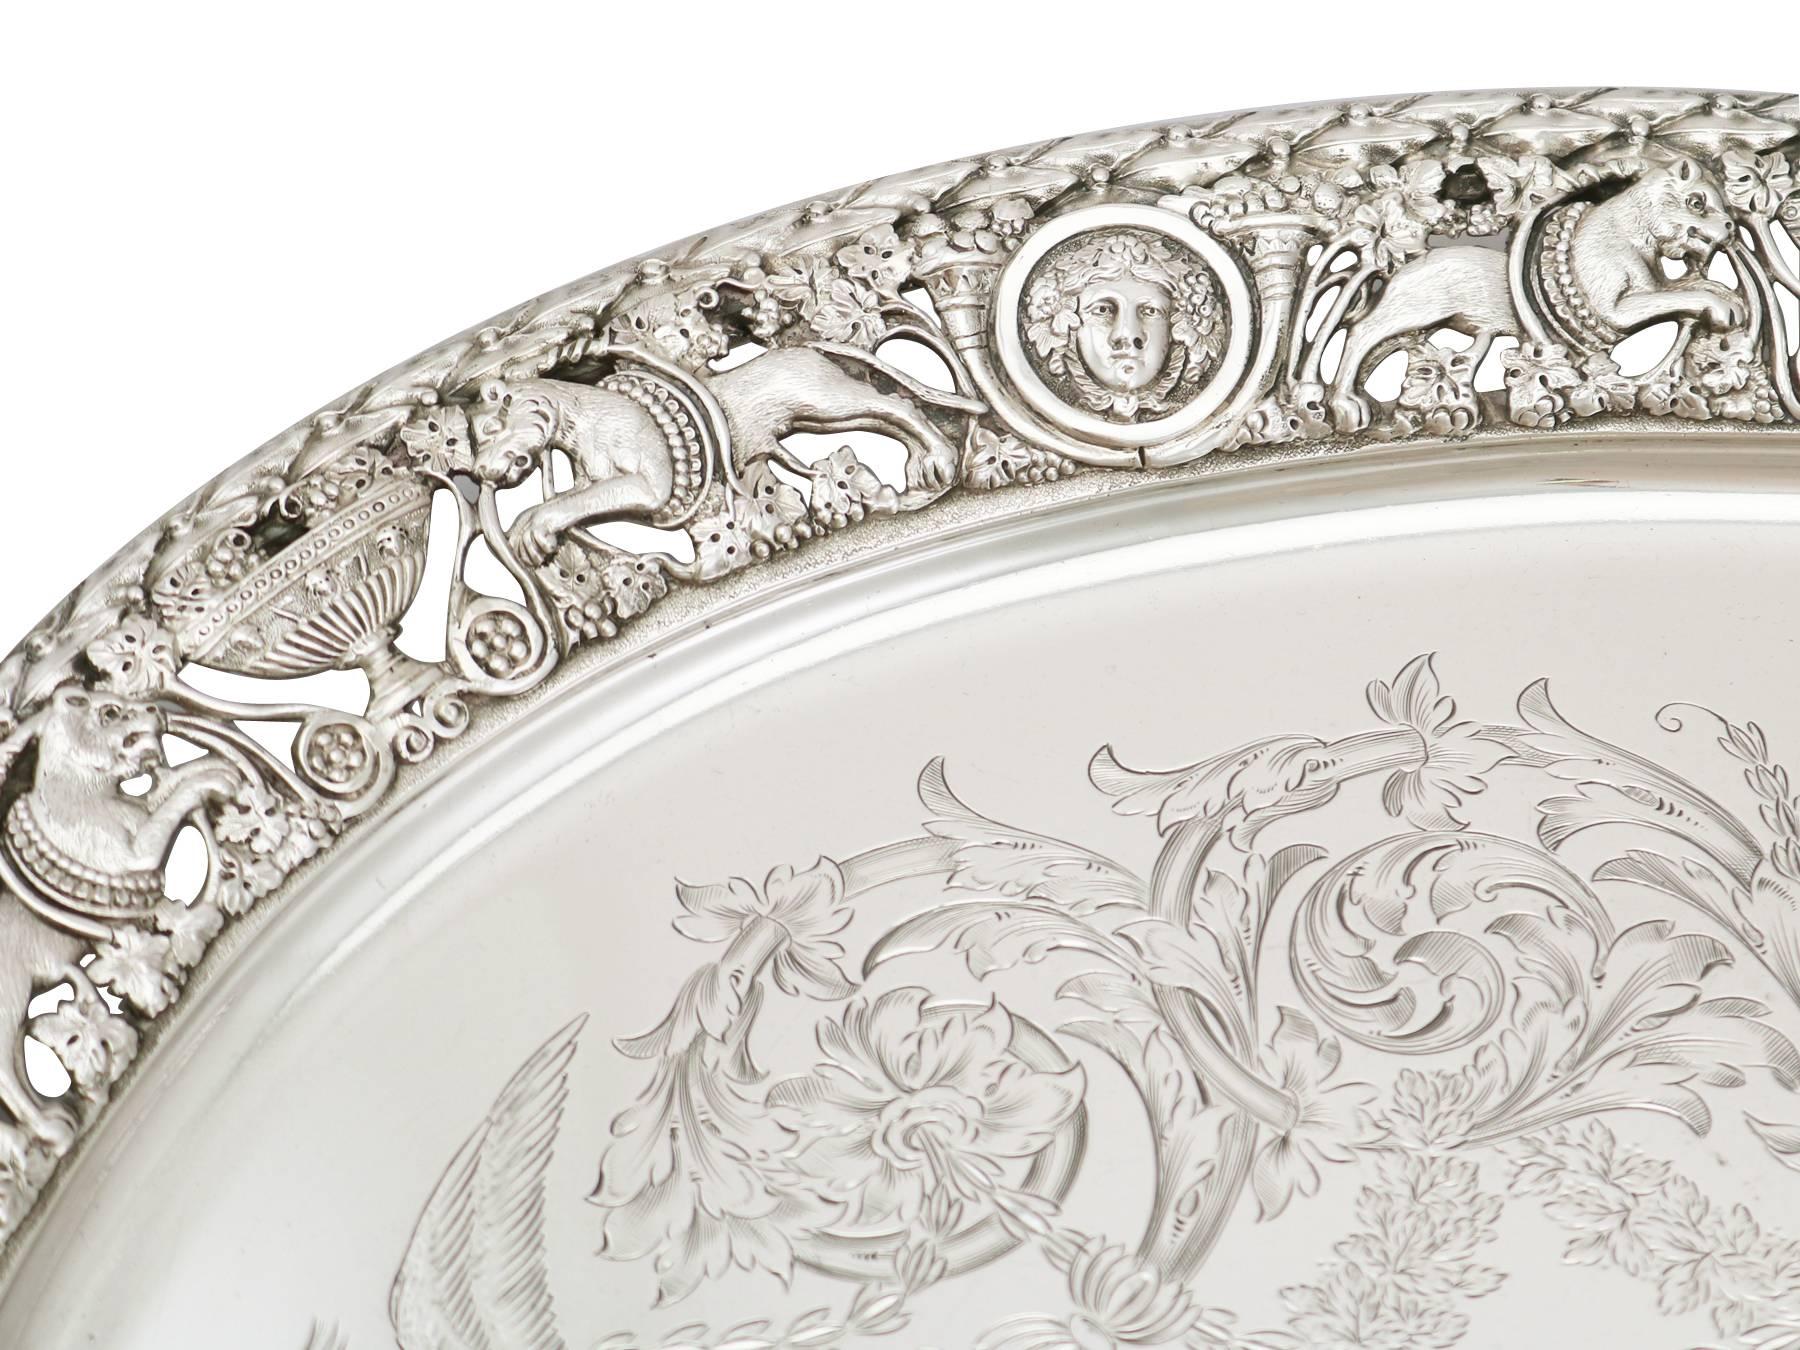 Late 19th Century Antique Victorian 1894 Sterling Silver Tea Tray by Mappin & Webb Ltd